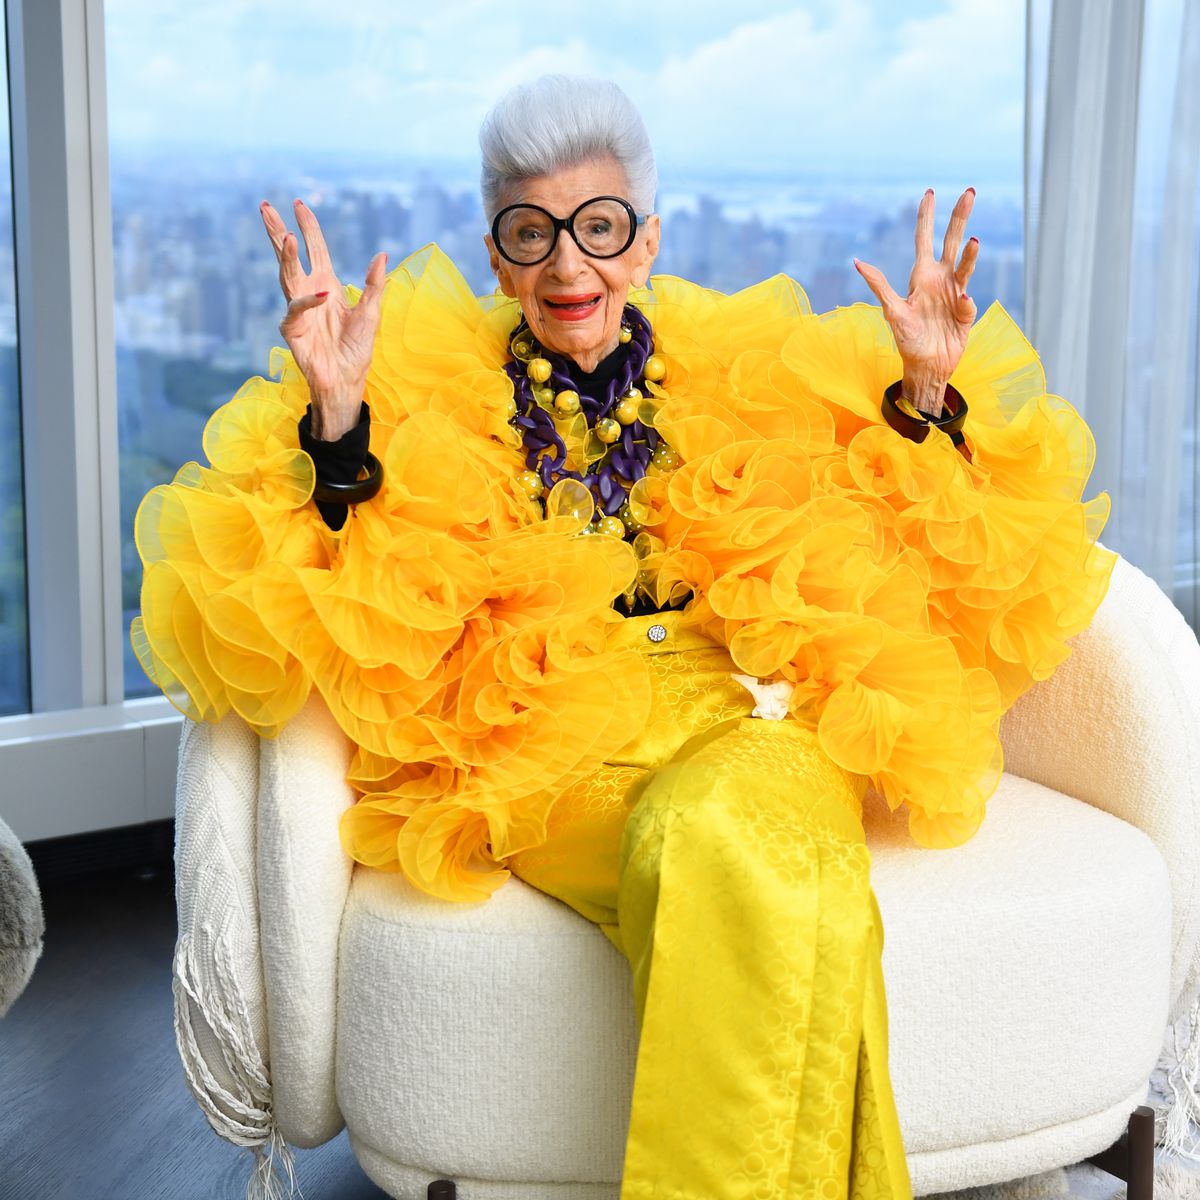 Iris Apfel wearing yellow clothes at a conference